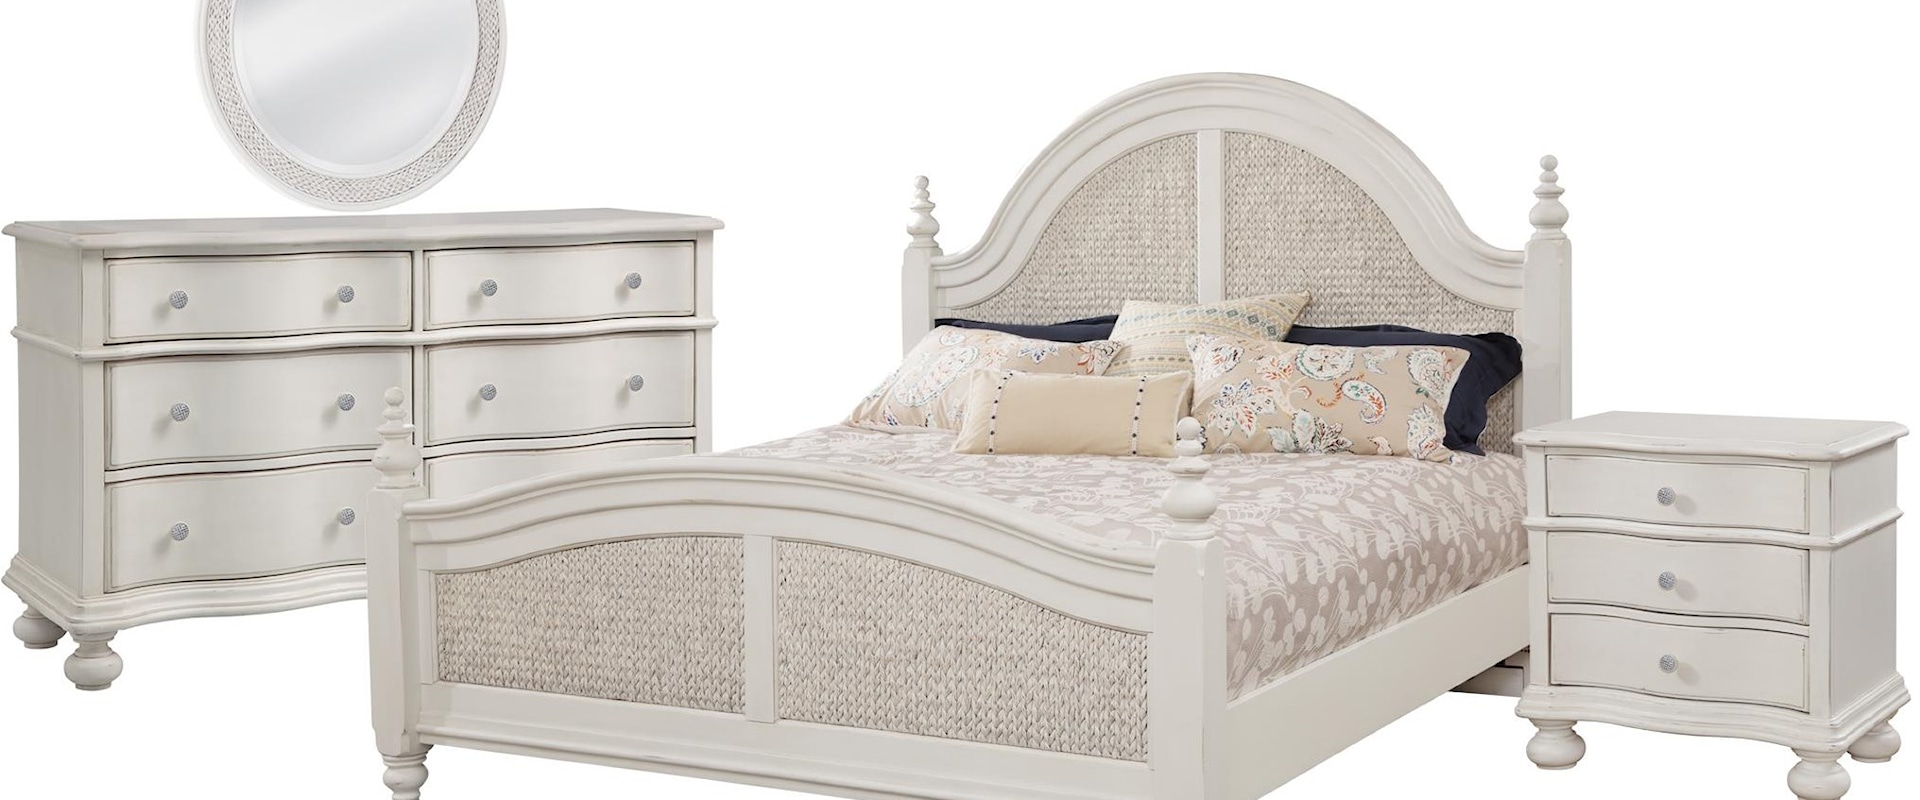 King Woven Bed, 6 Drawer Dresser, Round Mirror, 3 Drawer Nghtstand